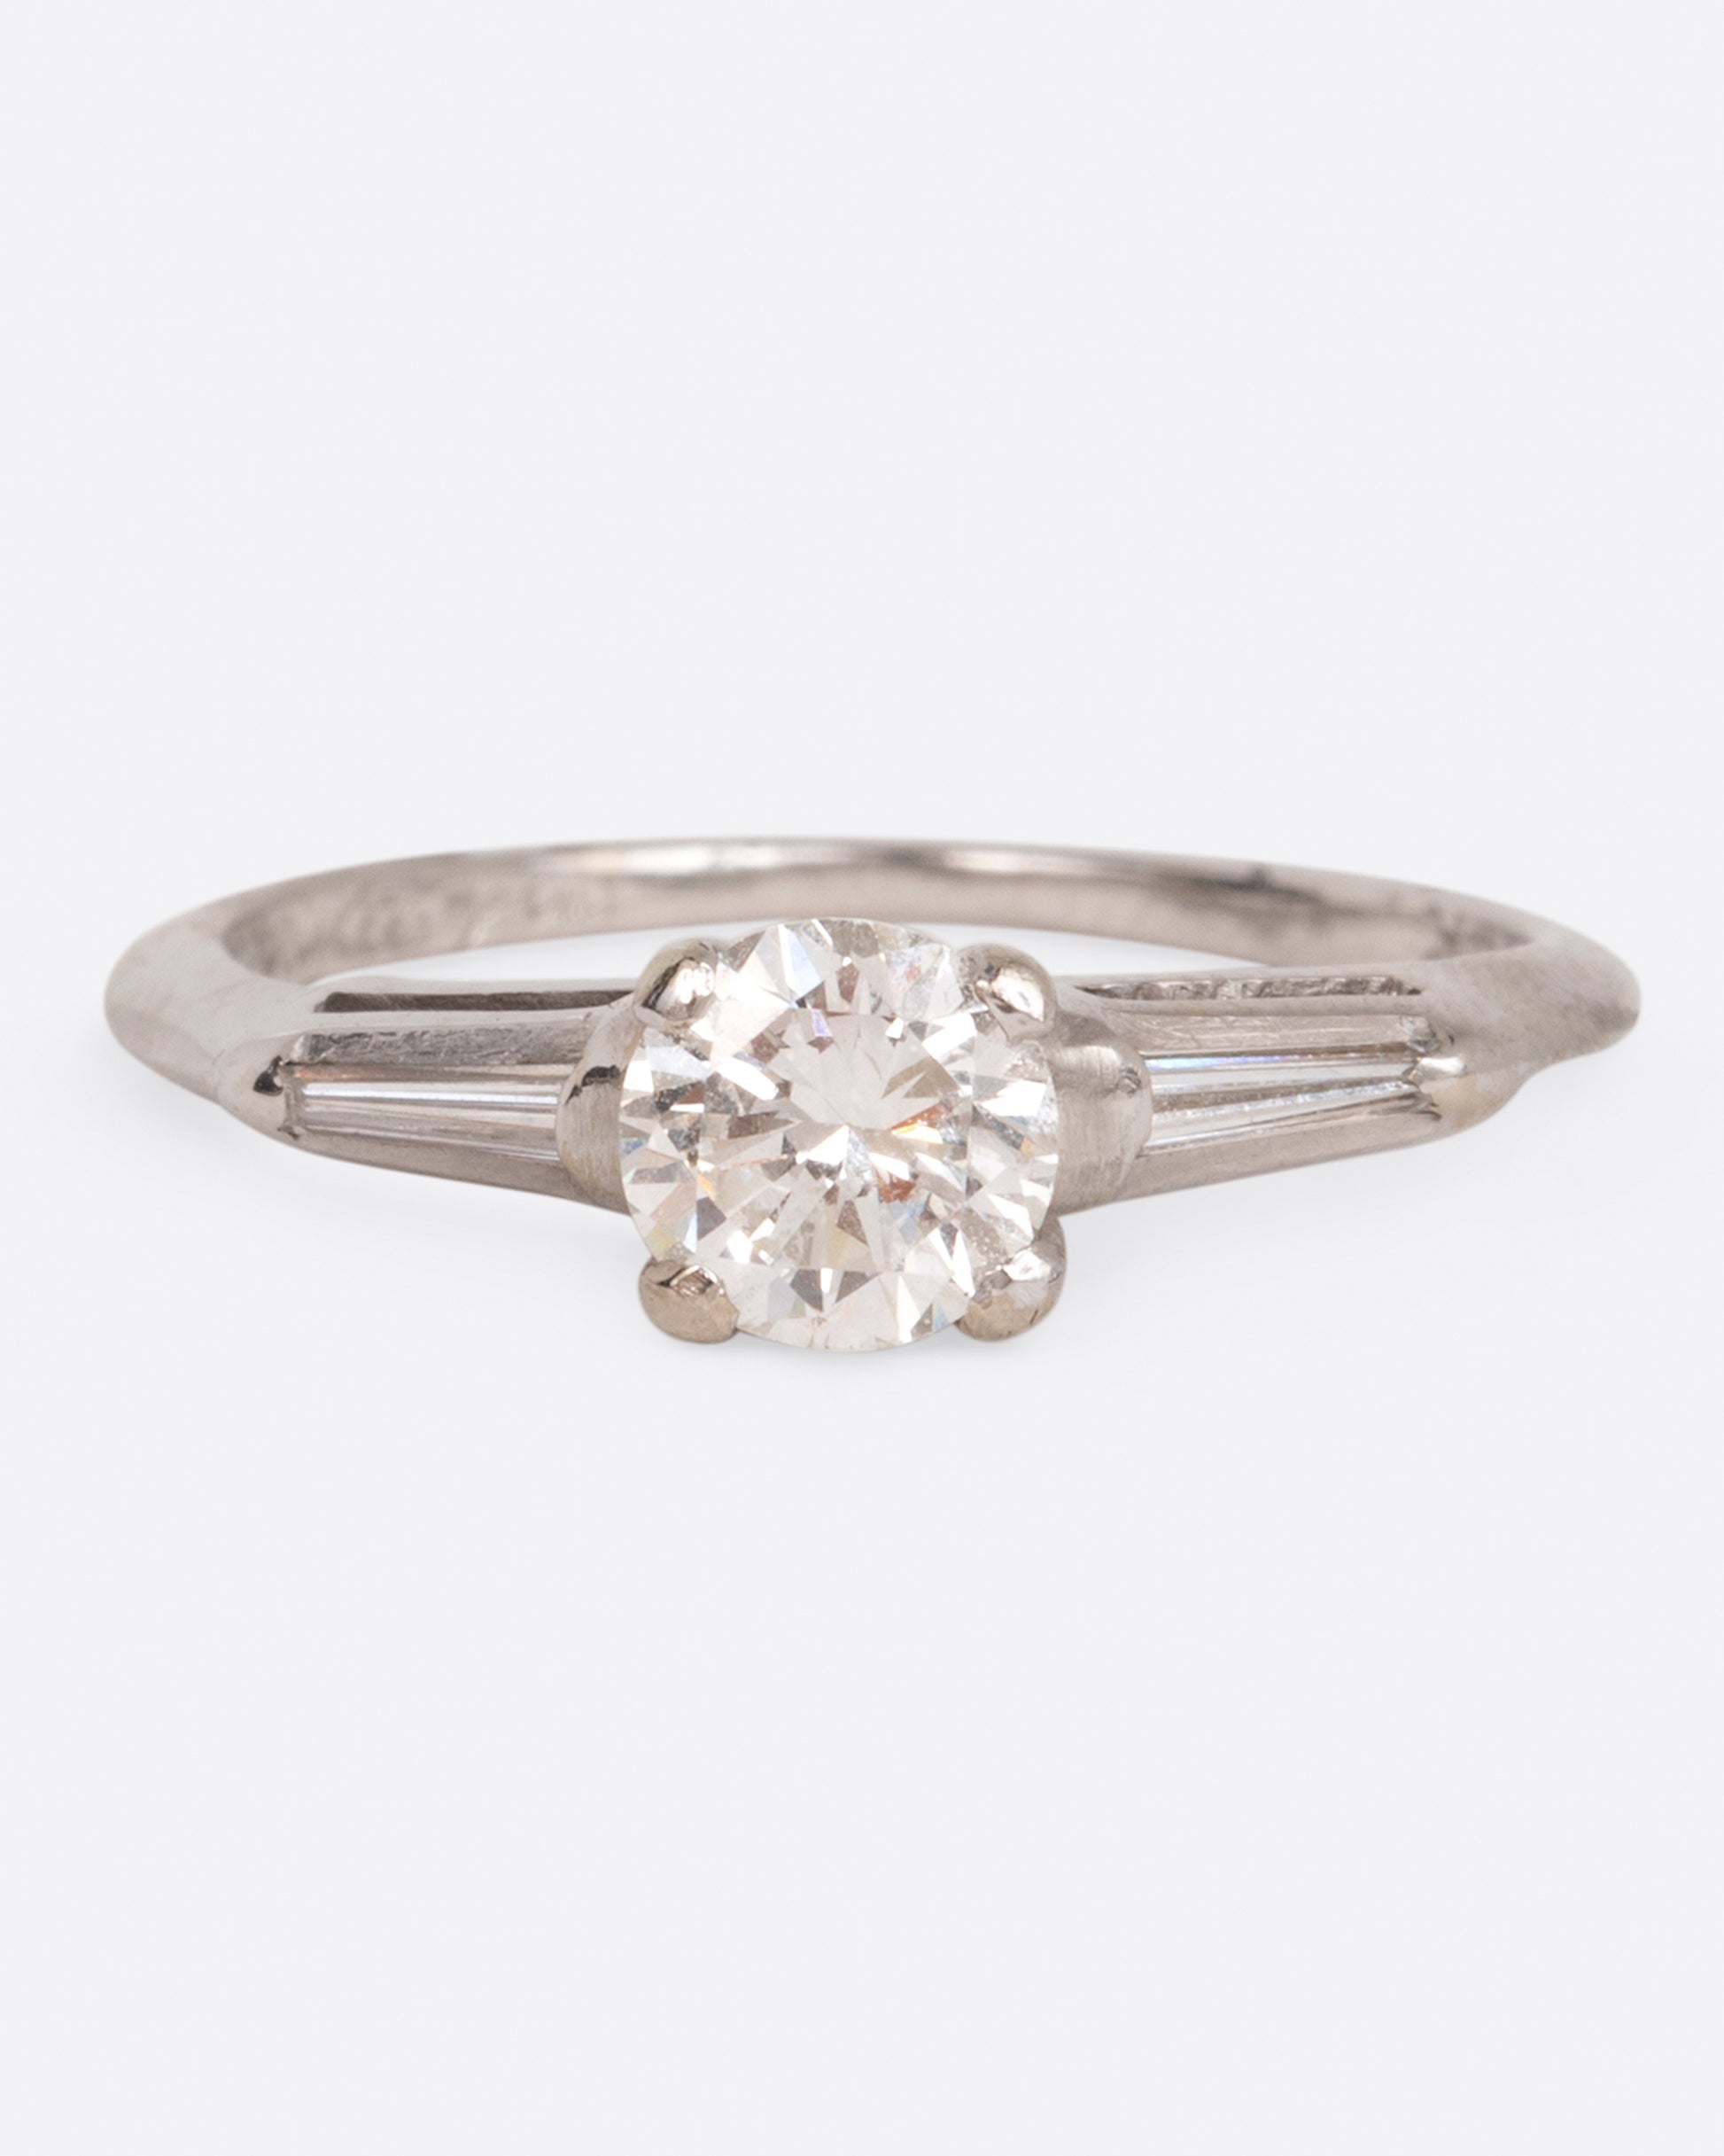 A white gold ring with a round prong-set diamond at the center and tapered baguette diamonds on either side, shown from the front.